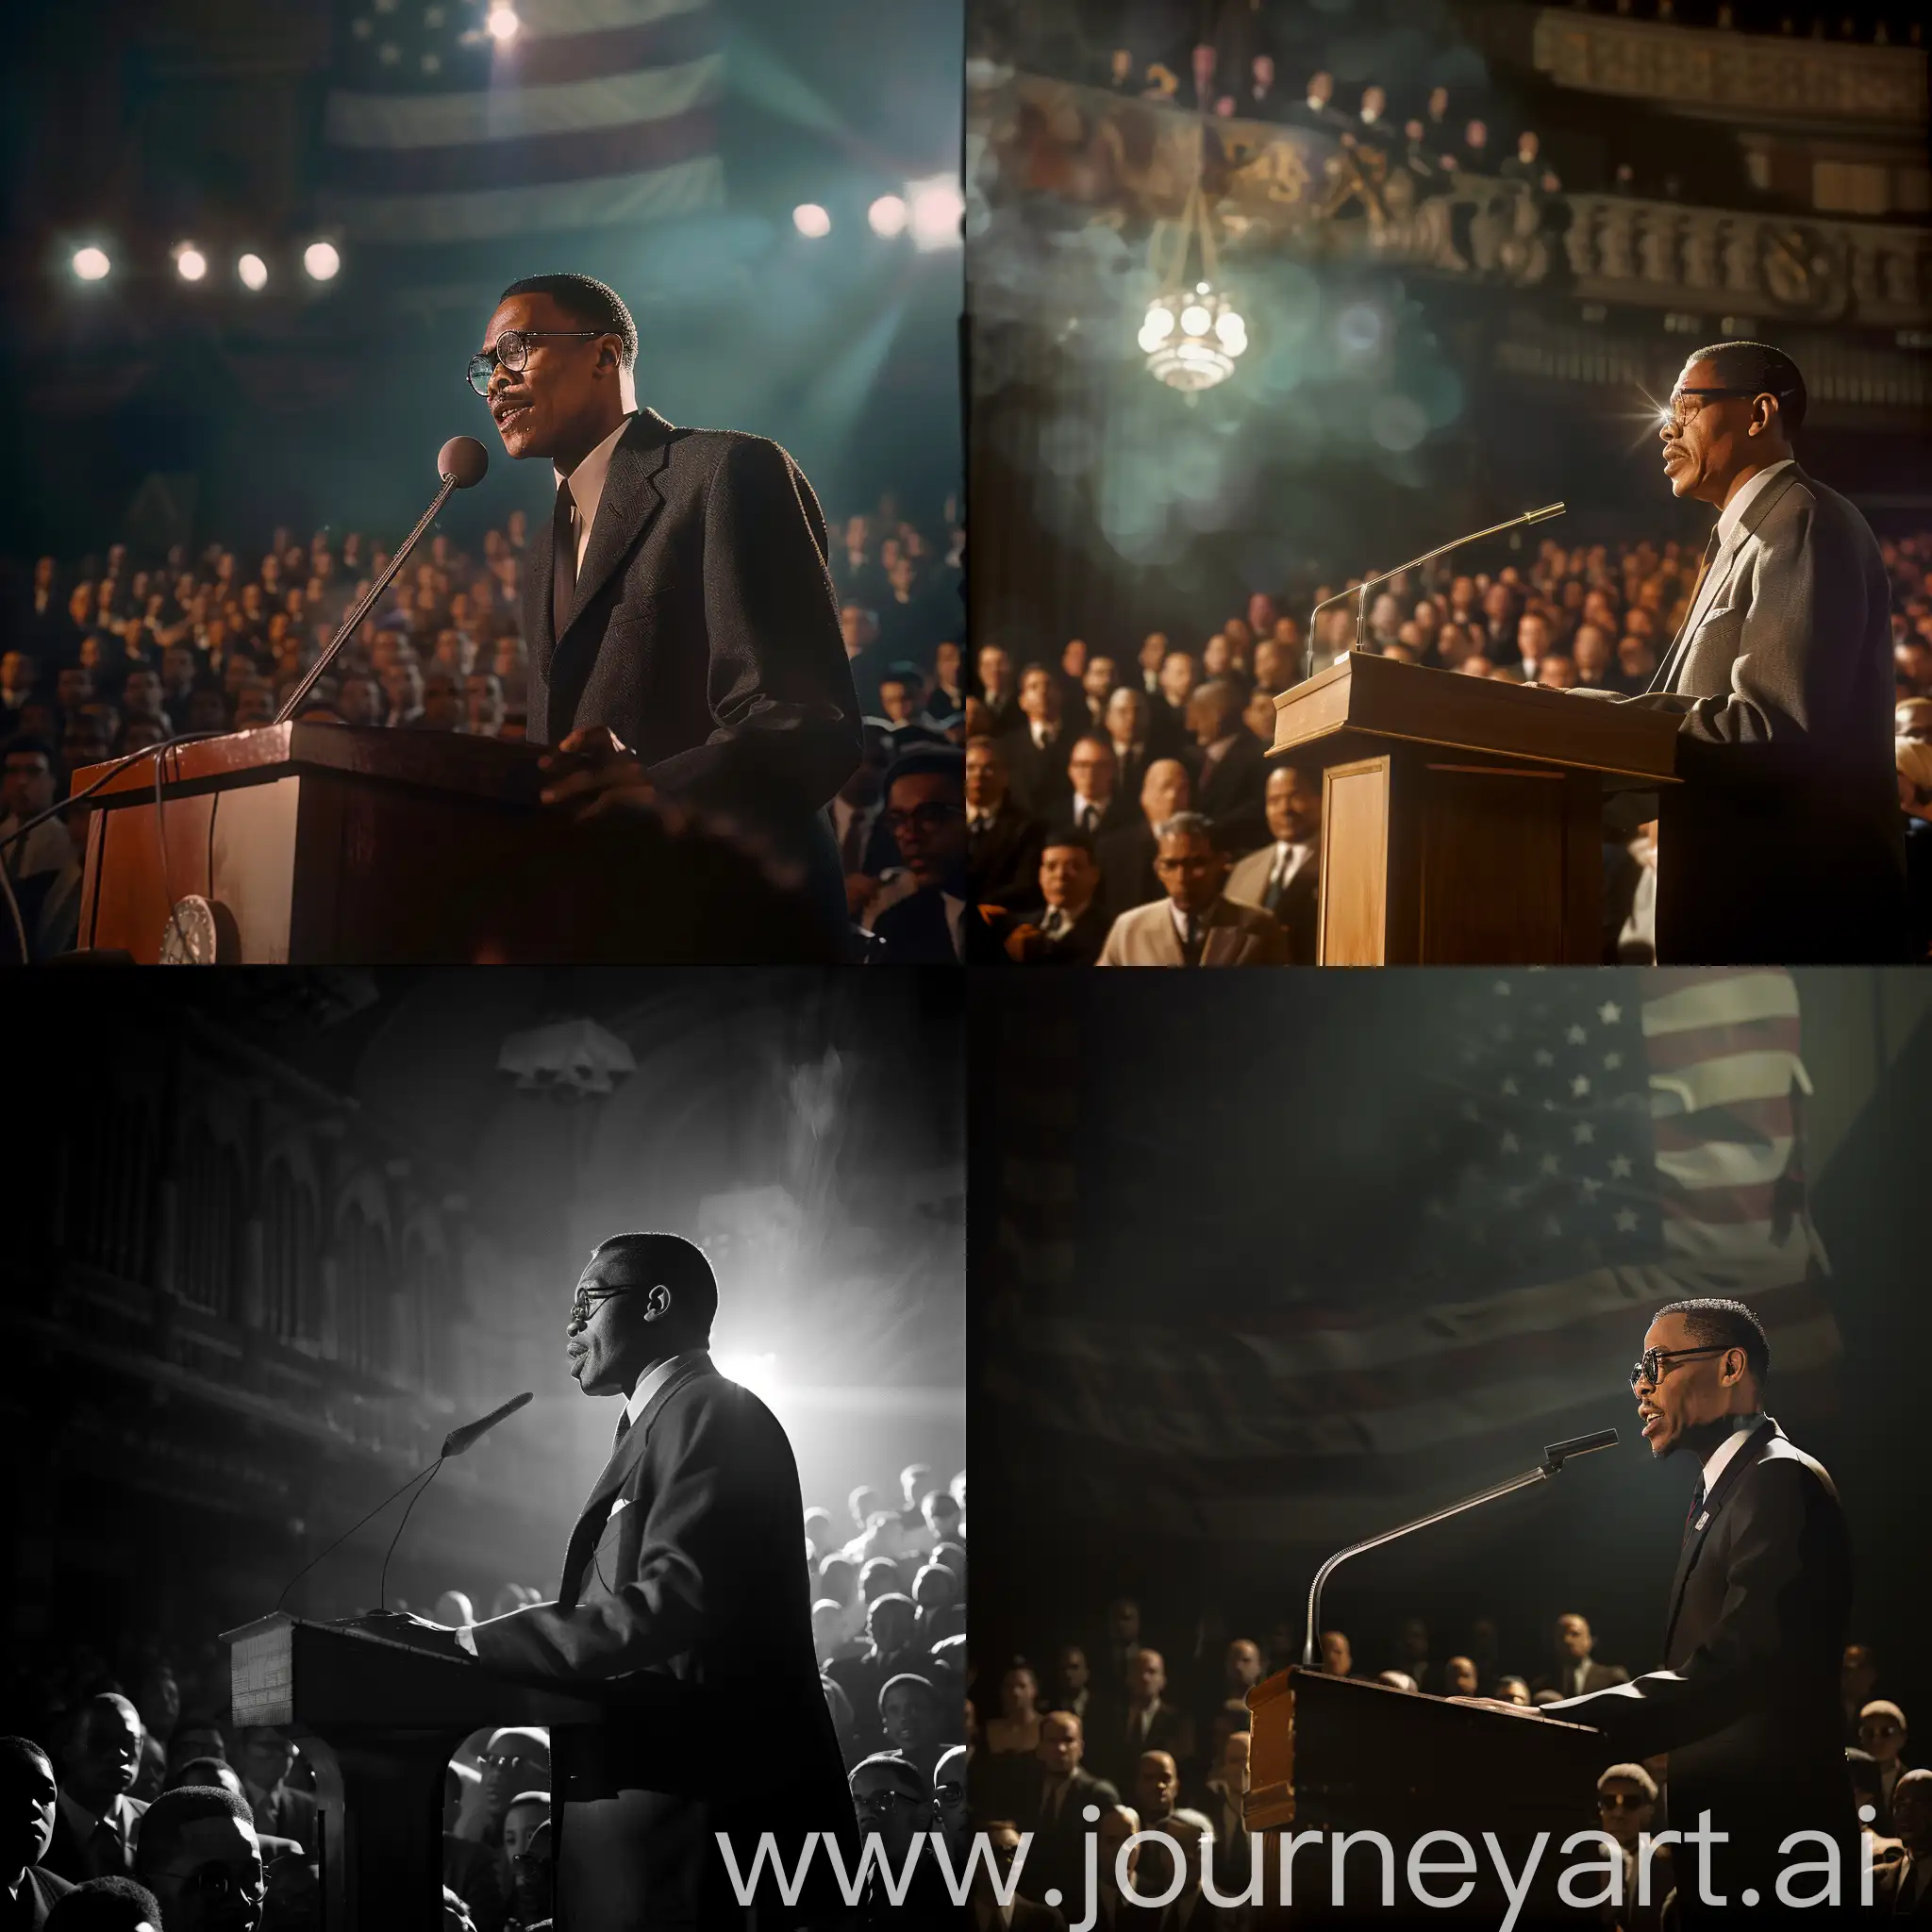 Malcolm X making a speech at lectern in New York. Crowd supports him. Cinematic lighting. Realistic image.